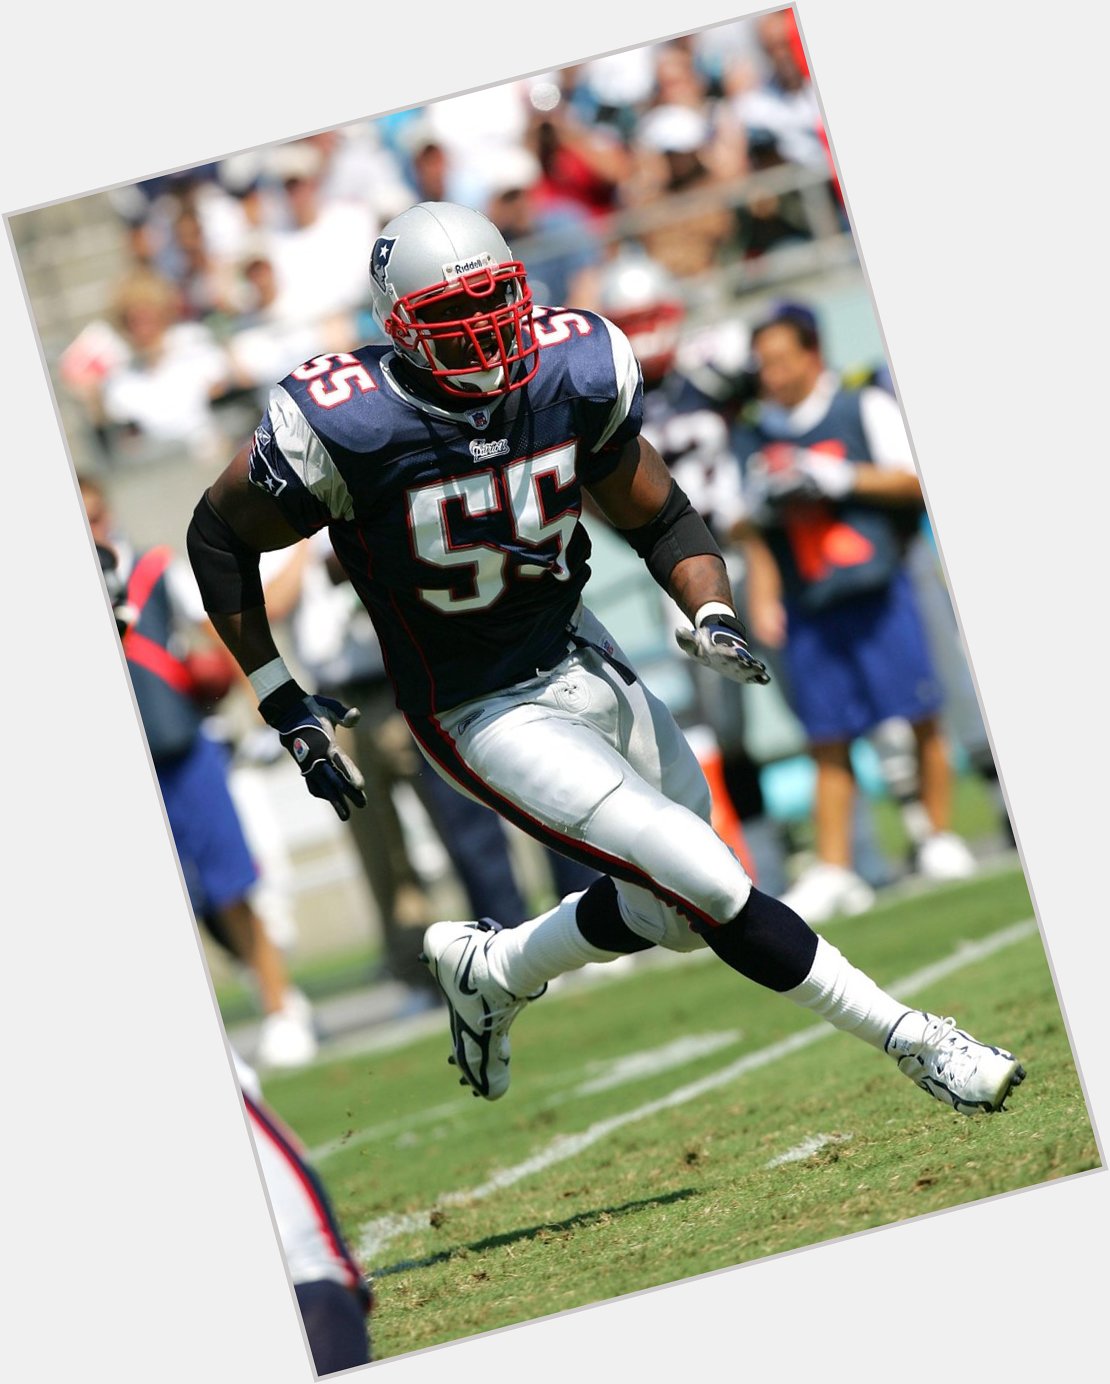 Happy Birthday to Willie McGinest who turns 46 today! 